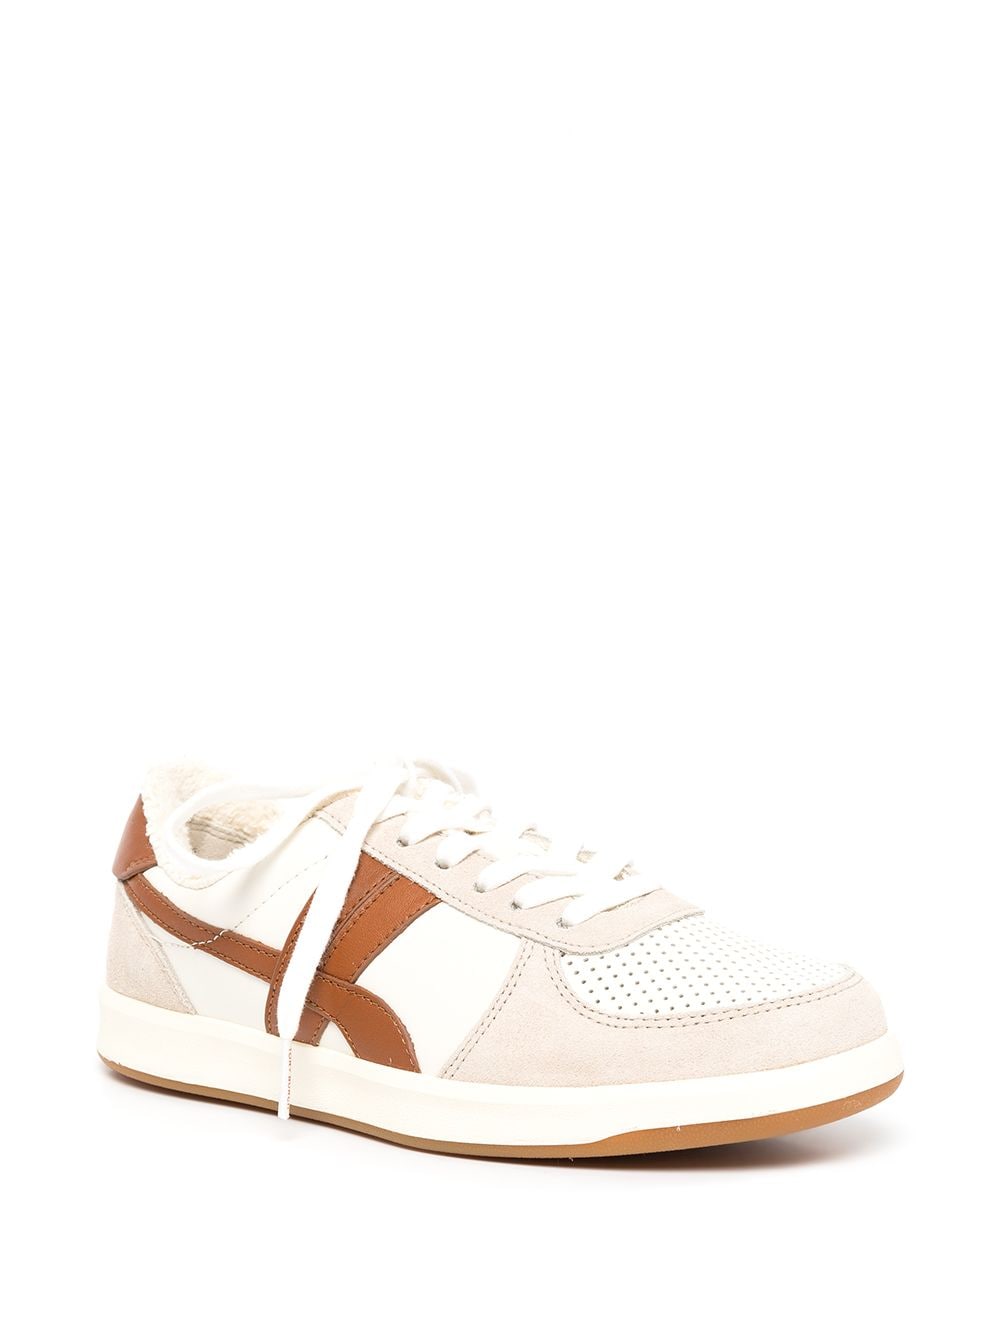 Tory Burch Hank Court Sneakers In White ModeSens